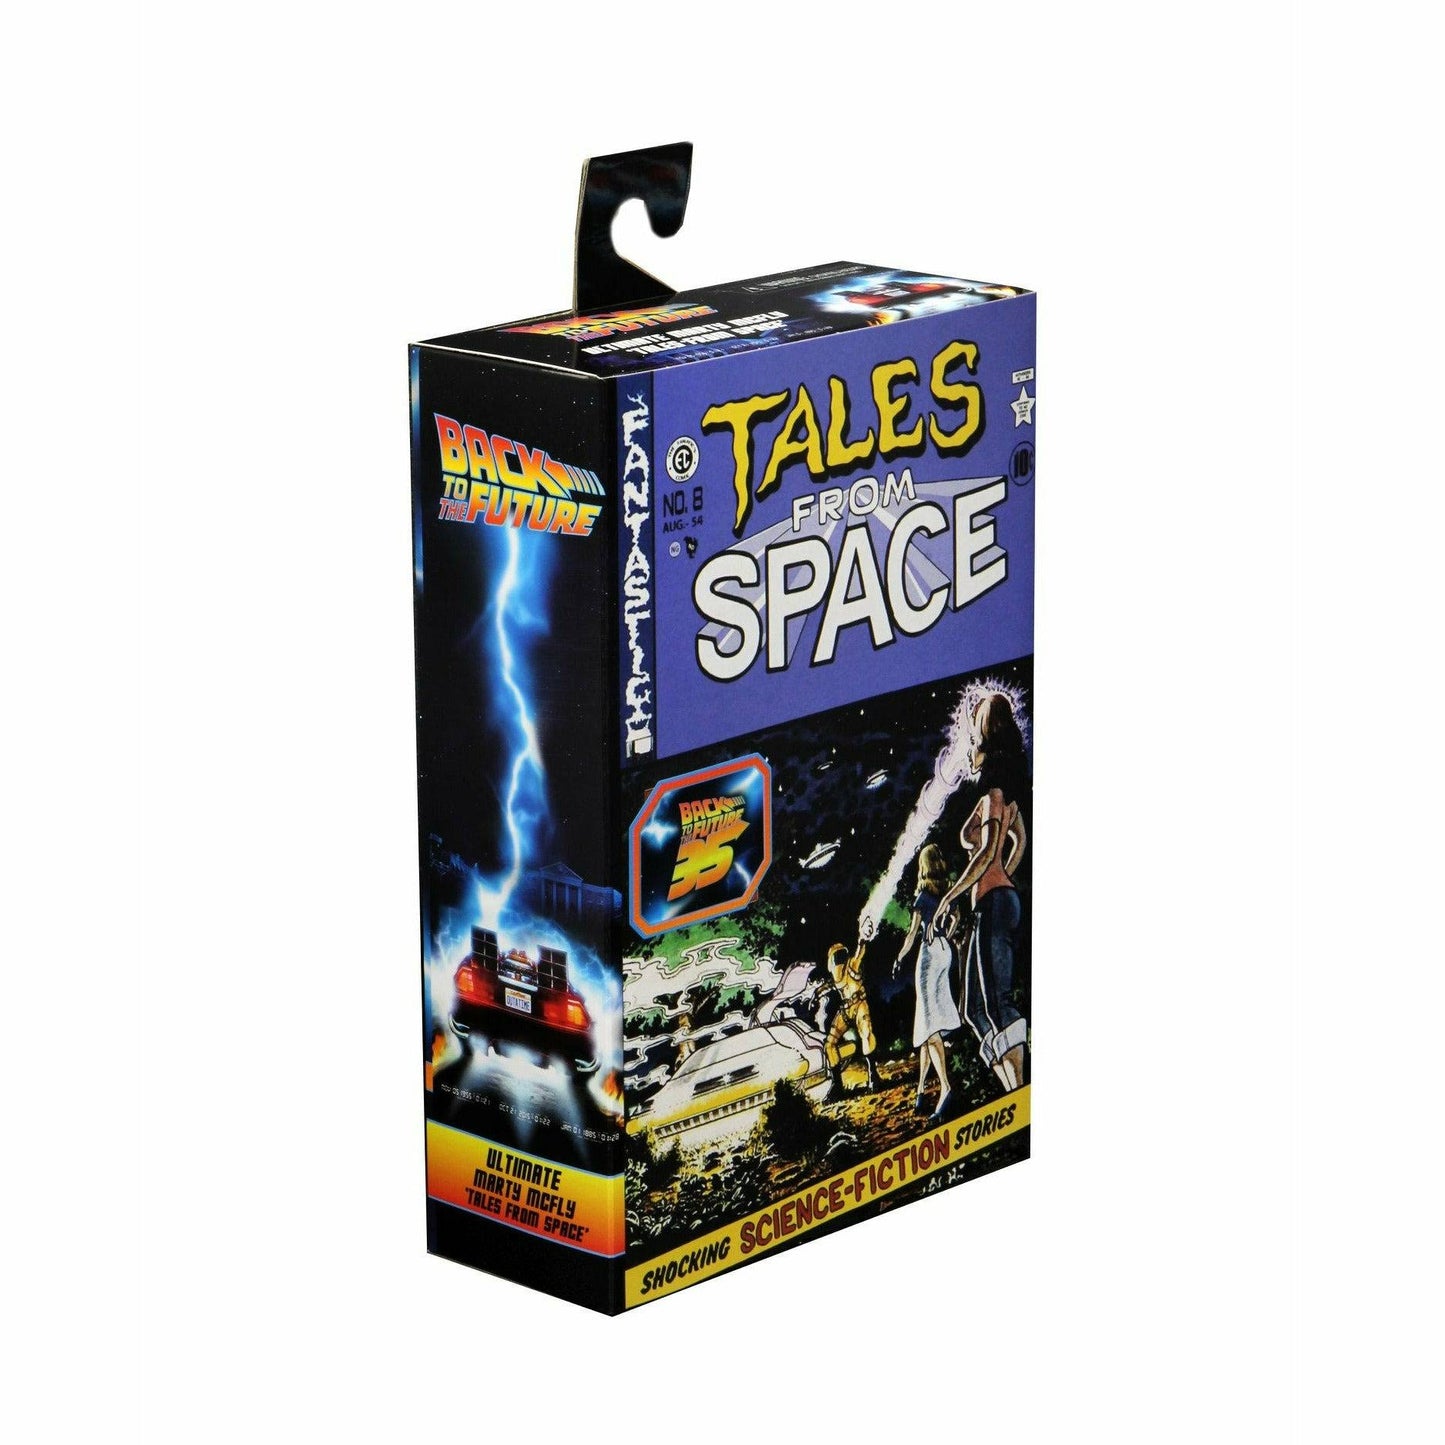 NECA Zurück in die Zukunft Actionfigur im 7-Zoll-Maßstab – Ultimate Marty McFly (1955 „Tales From Space“)